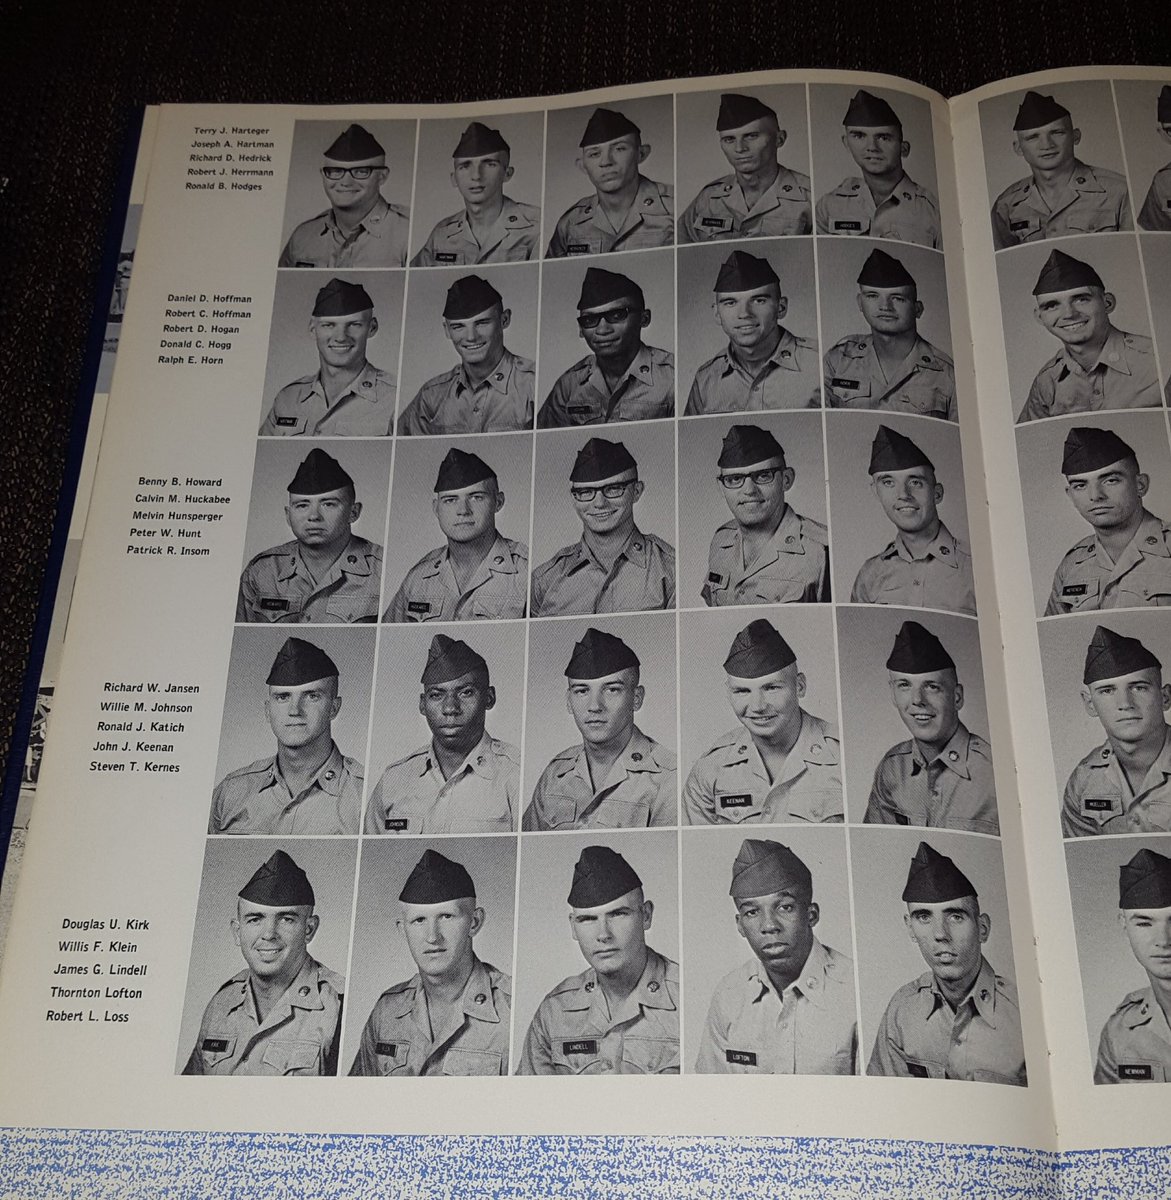 Yesterday I went to an estate sale and bought this book company d fifth battalion 3rd Brigade November 2nd 1967 basic training graduation class. Most of these guys probably went to Vietnam. Some did not come back. Photos below.